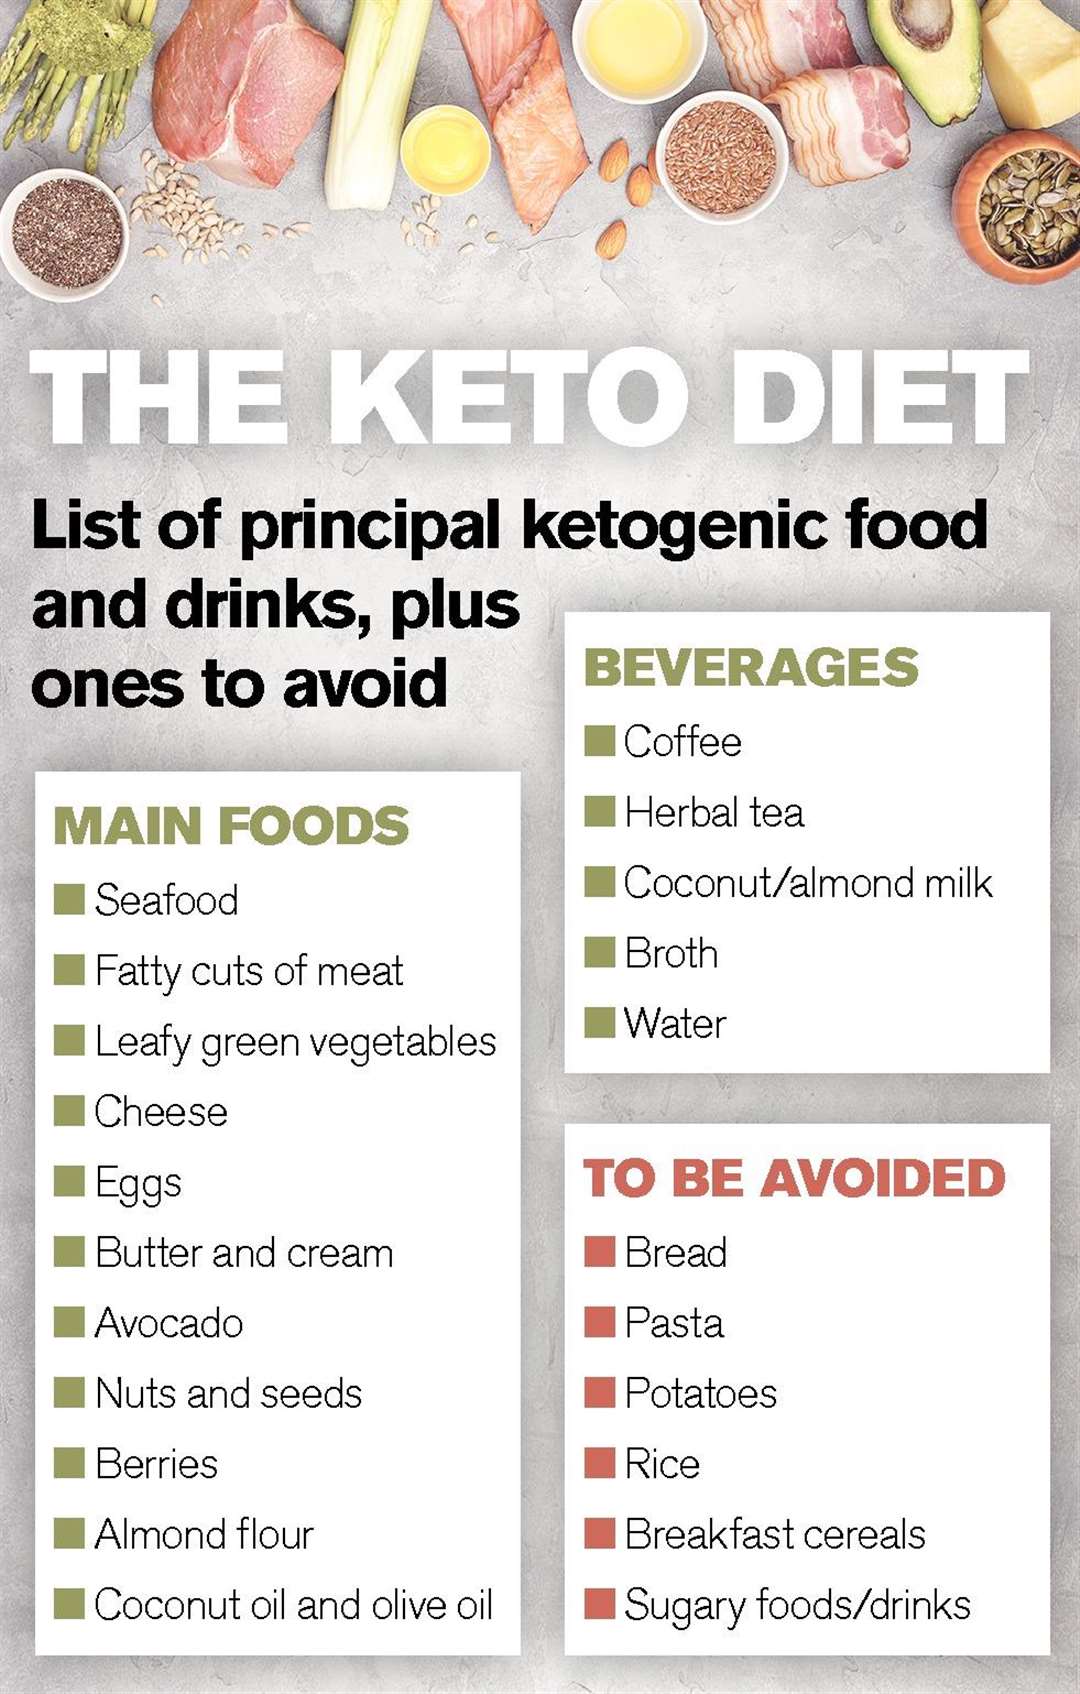 Here's why people in Kent and Medway are trying the Keto diet